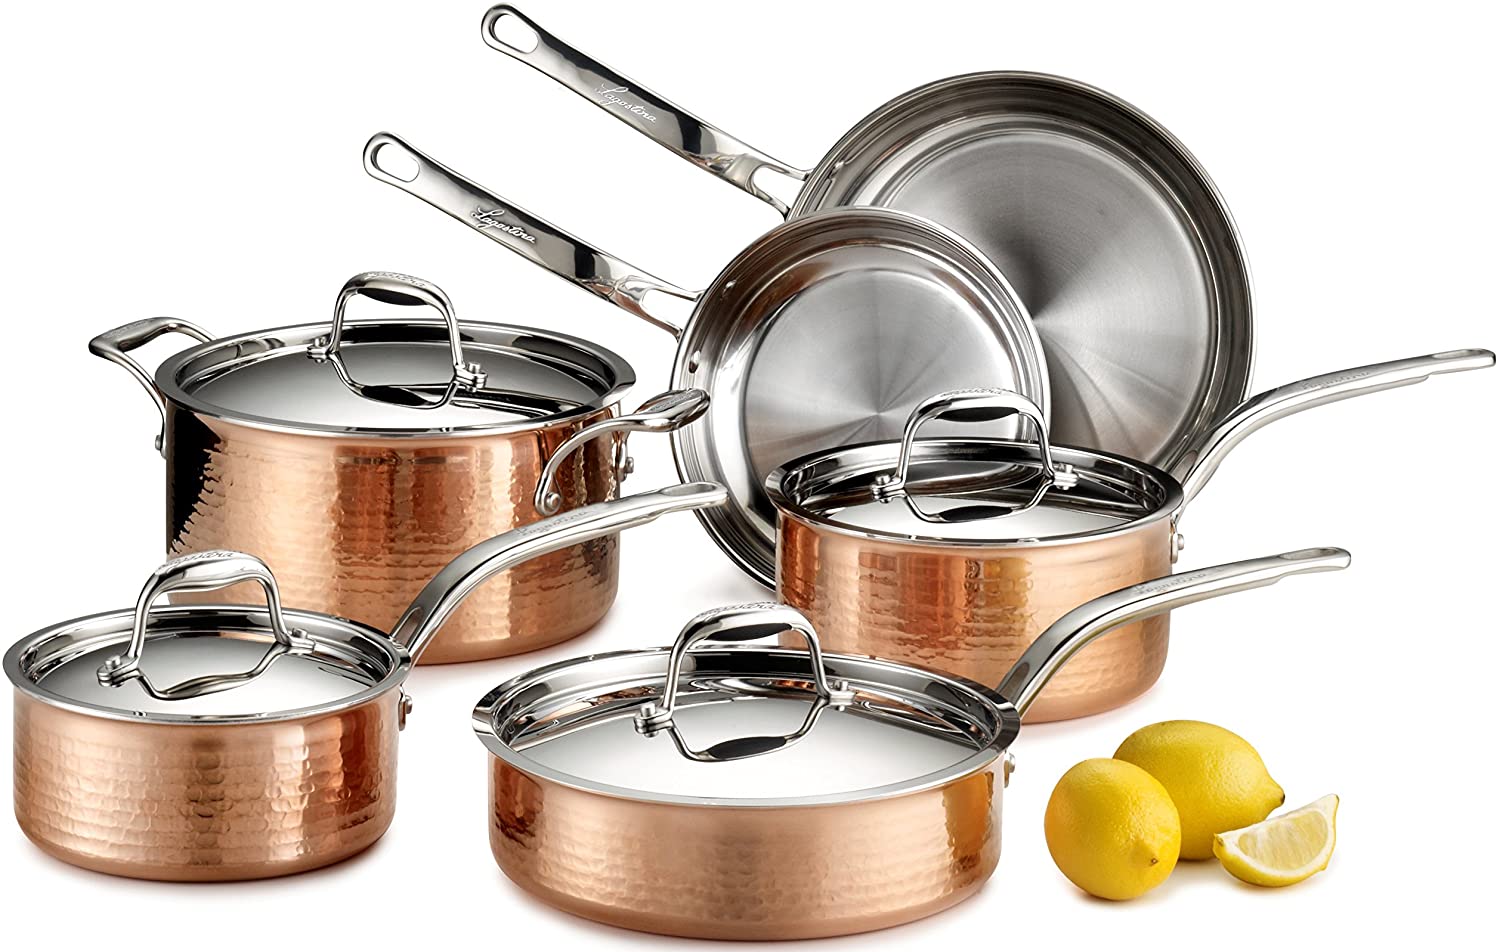 Lagostina Martellata Hammered Copper Tri-Ply Stainless Steel Cookware Set